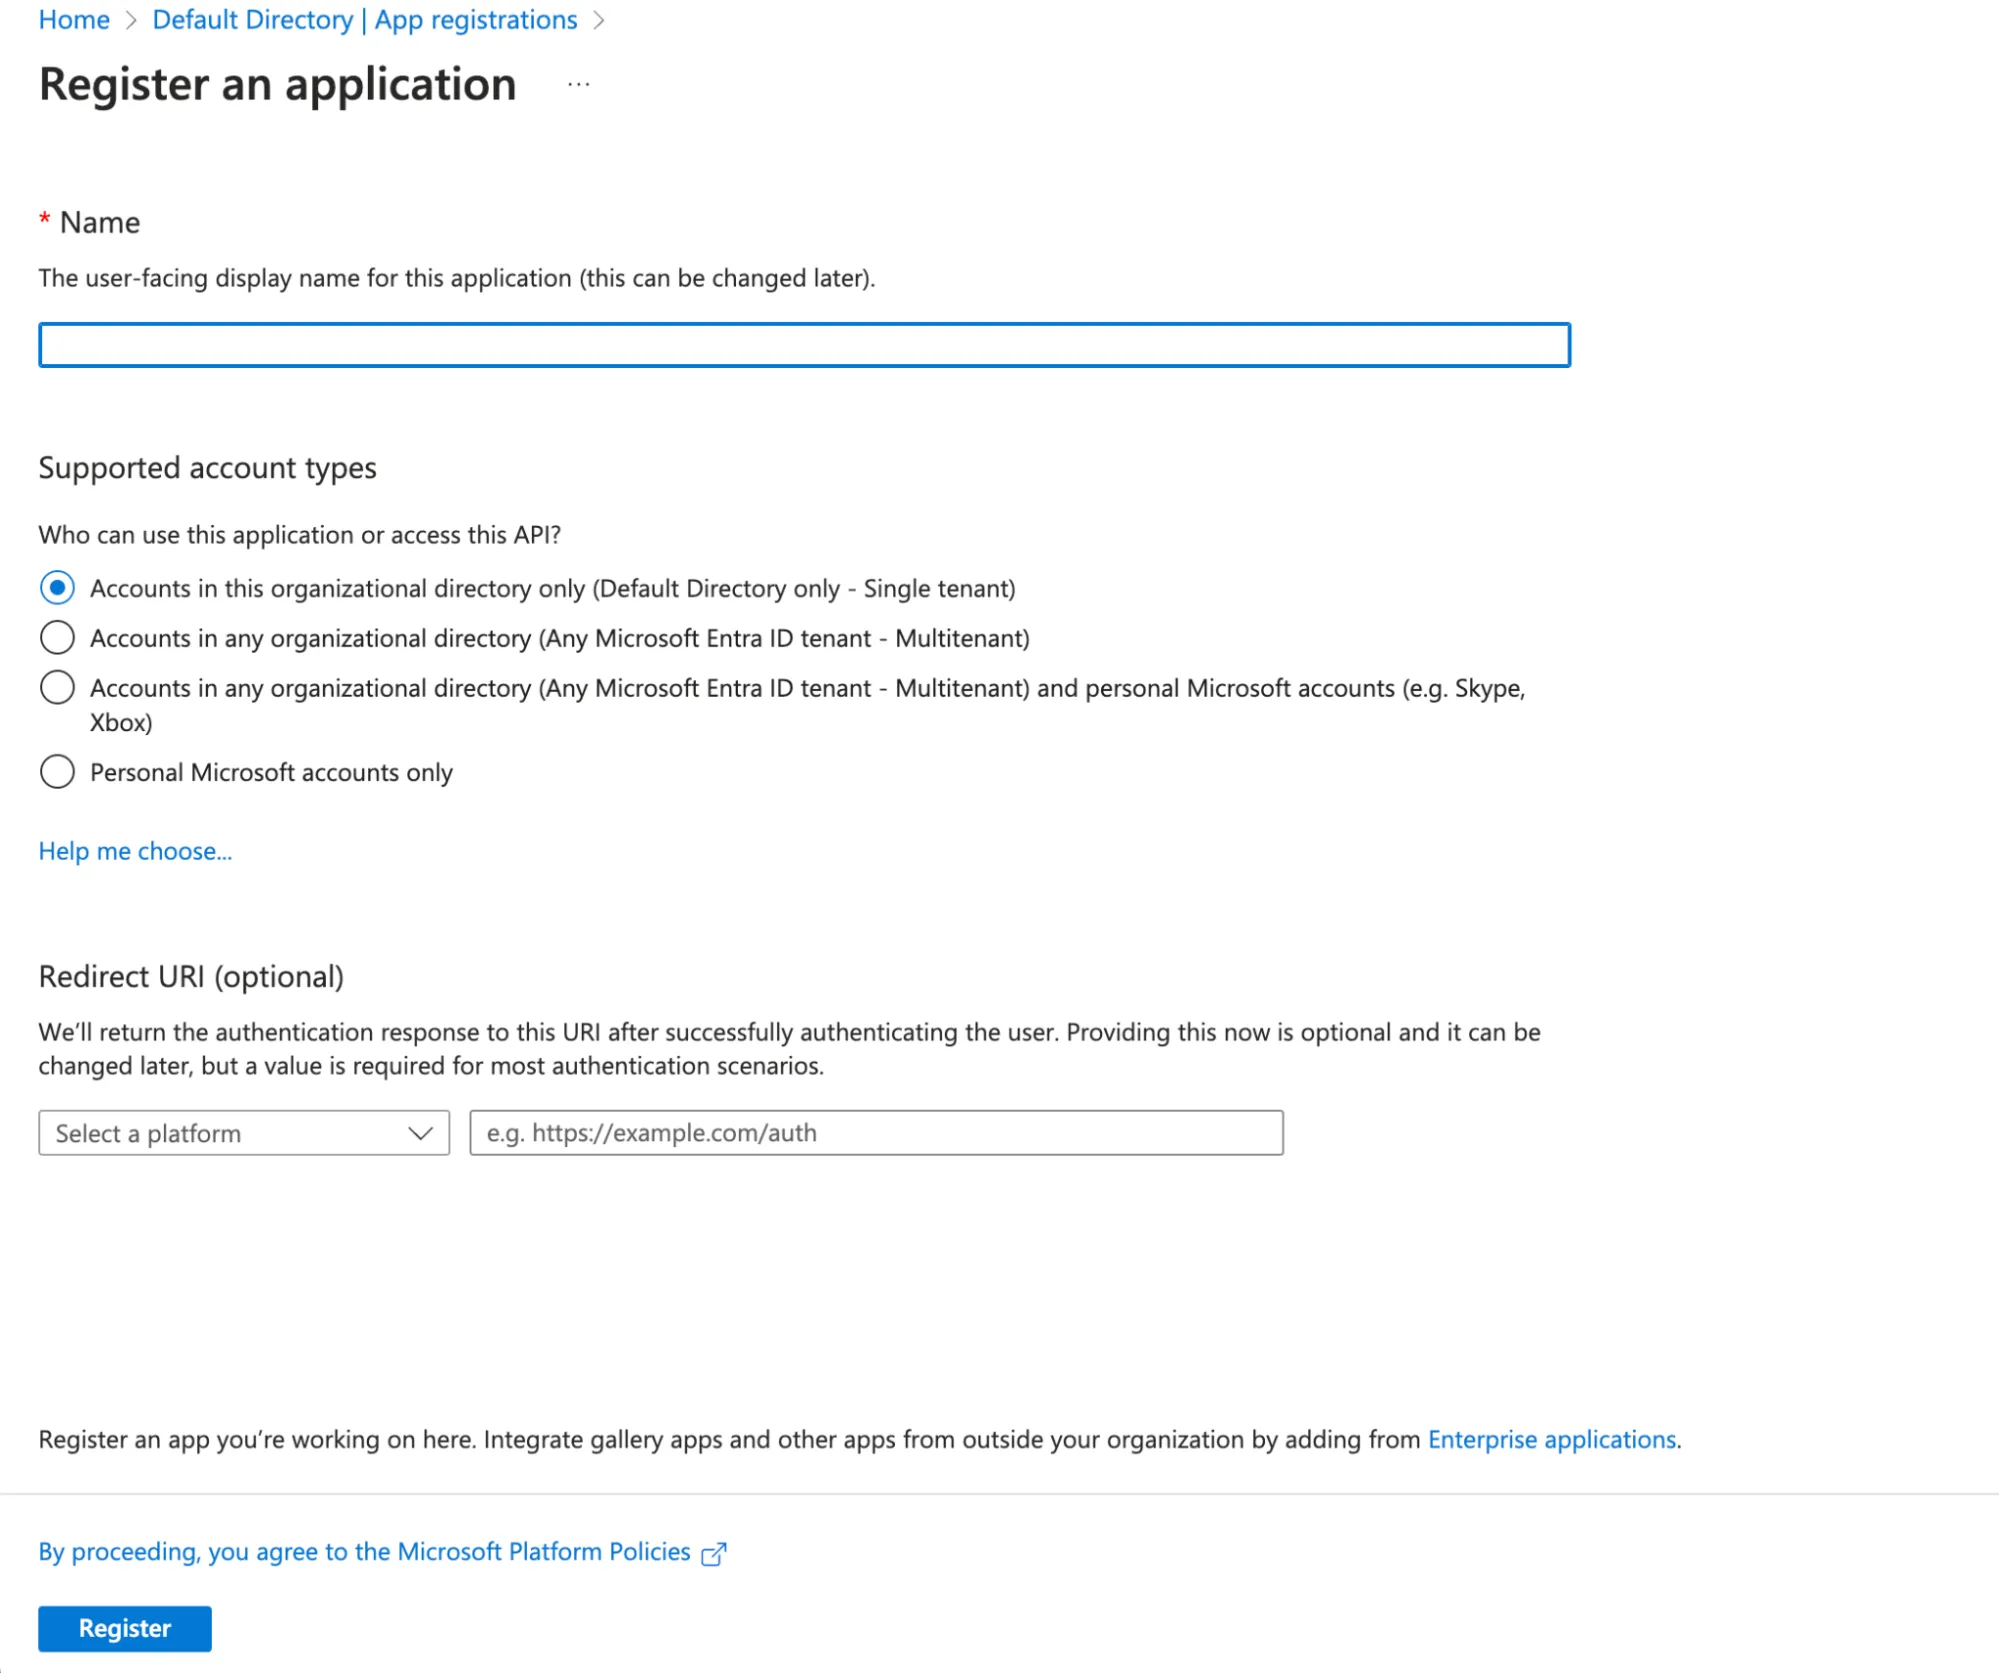 Registering a new application on Microsoft Entra